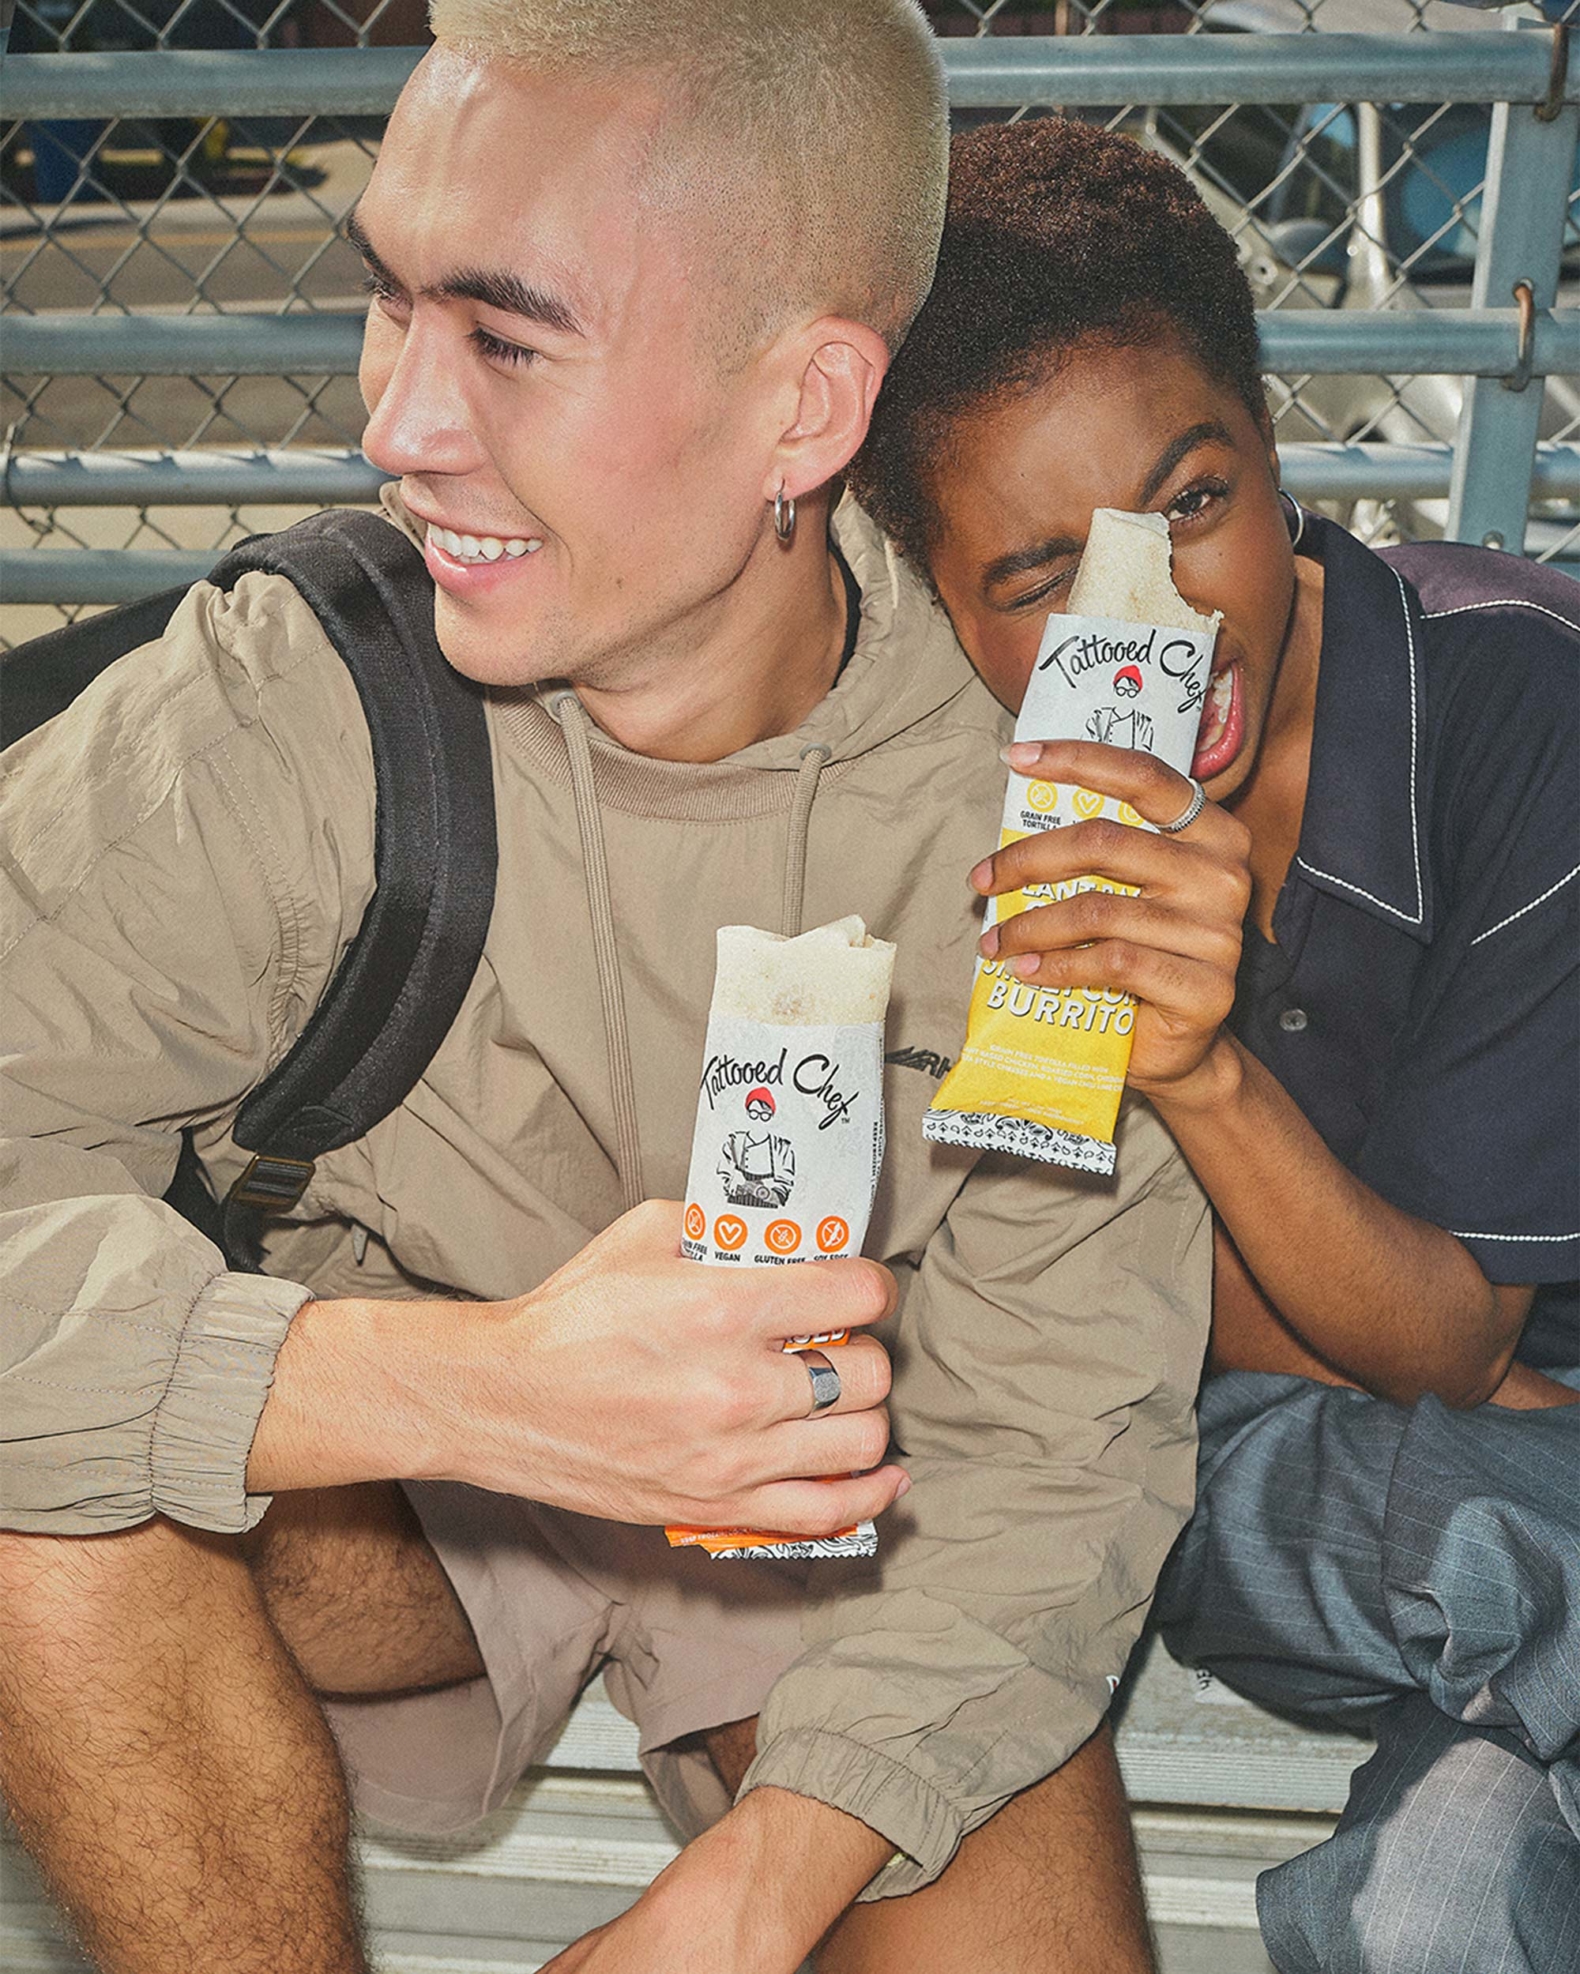 A man with blonde buzzed hair and tan sweatshirt holds a Tattooed Chef burrito and is sitting on school bleachers next to a girl with short afro and blue collared t-shirt, also holding a Tattooed Chef burrito of another flavor.